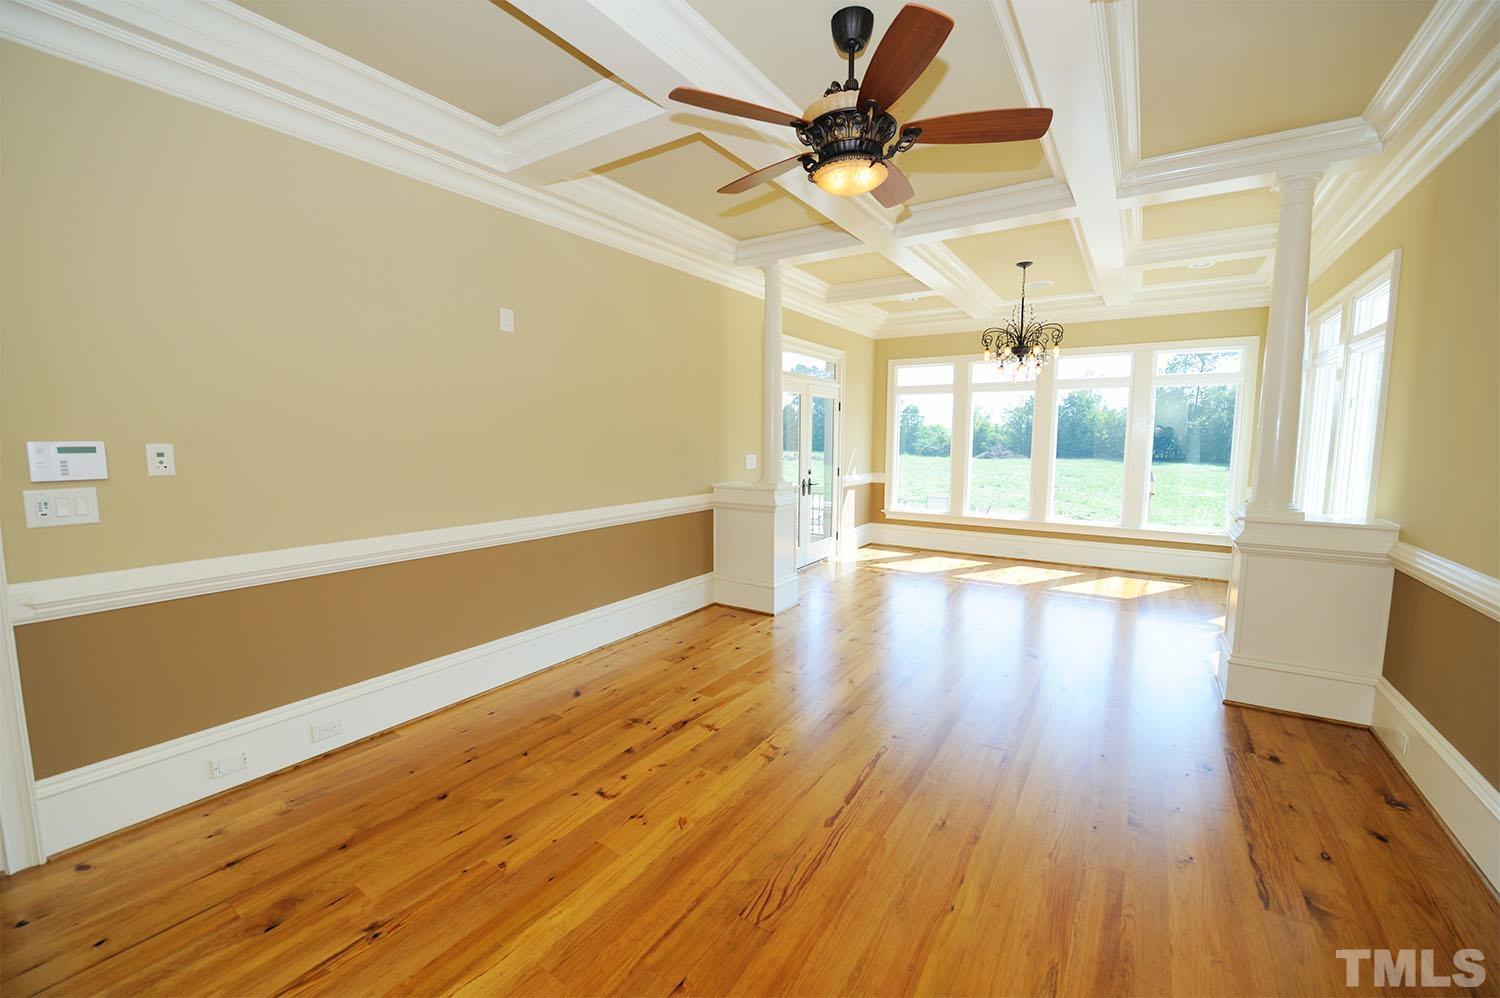 The master suite has a coffered ceiling, chair rail, crown and hardwood flooring. Columns separate it from the sitting room. It has is a door to the covered porch. This room is also on its own zone.